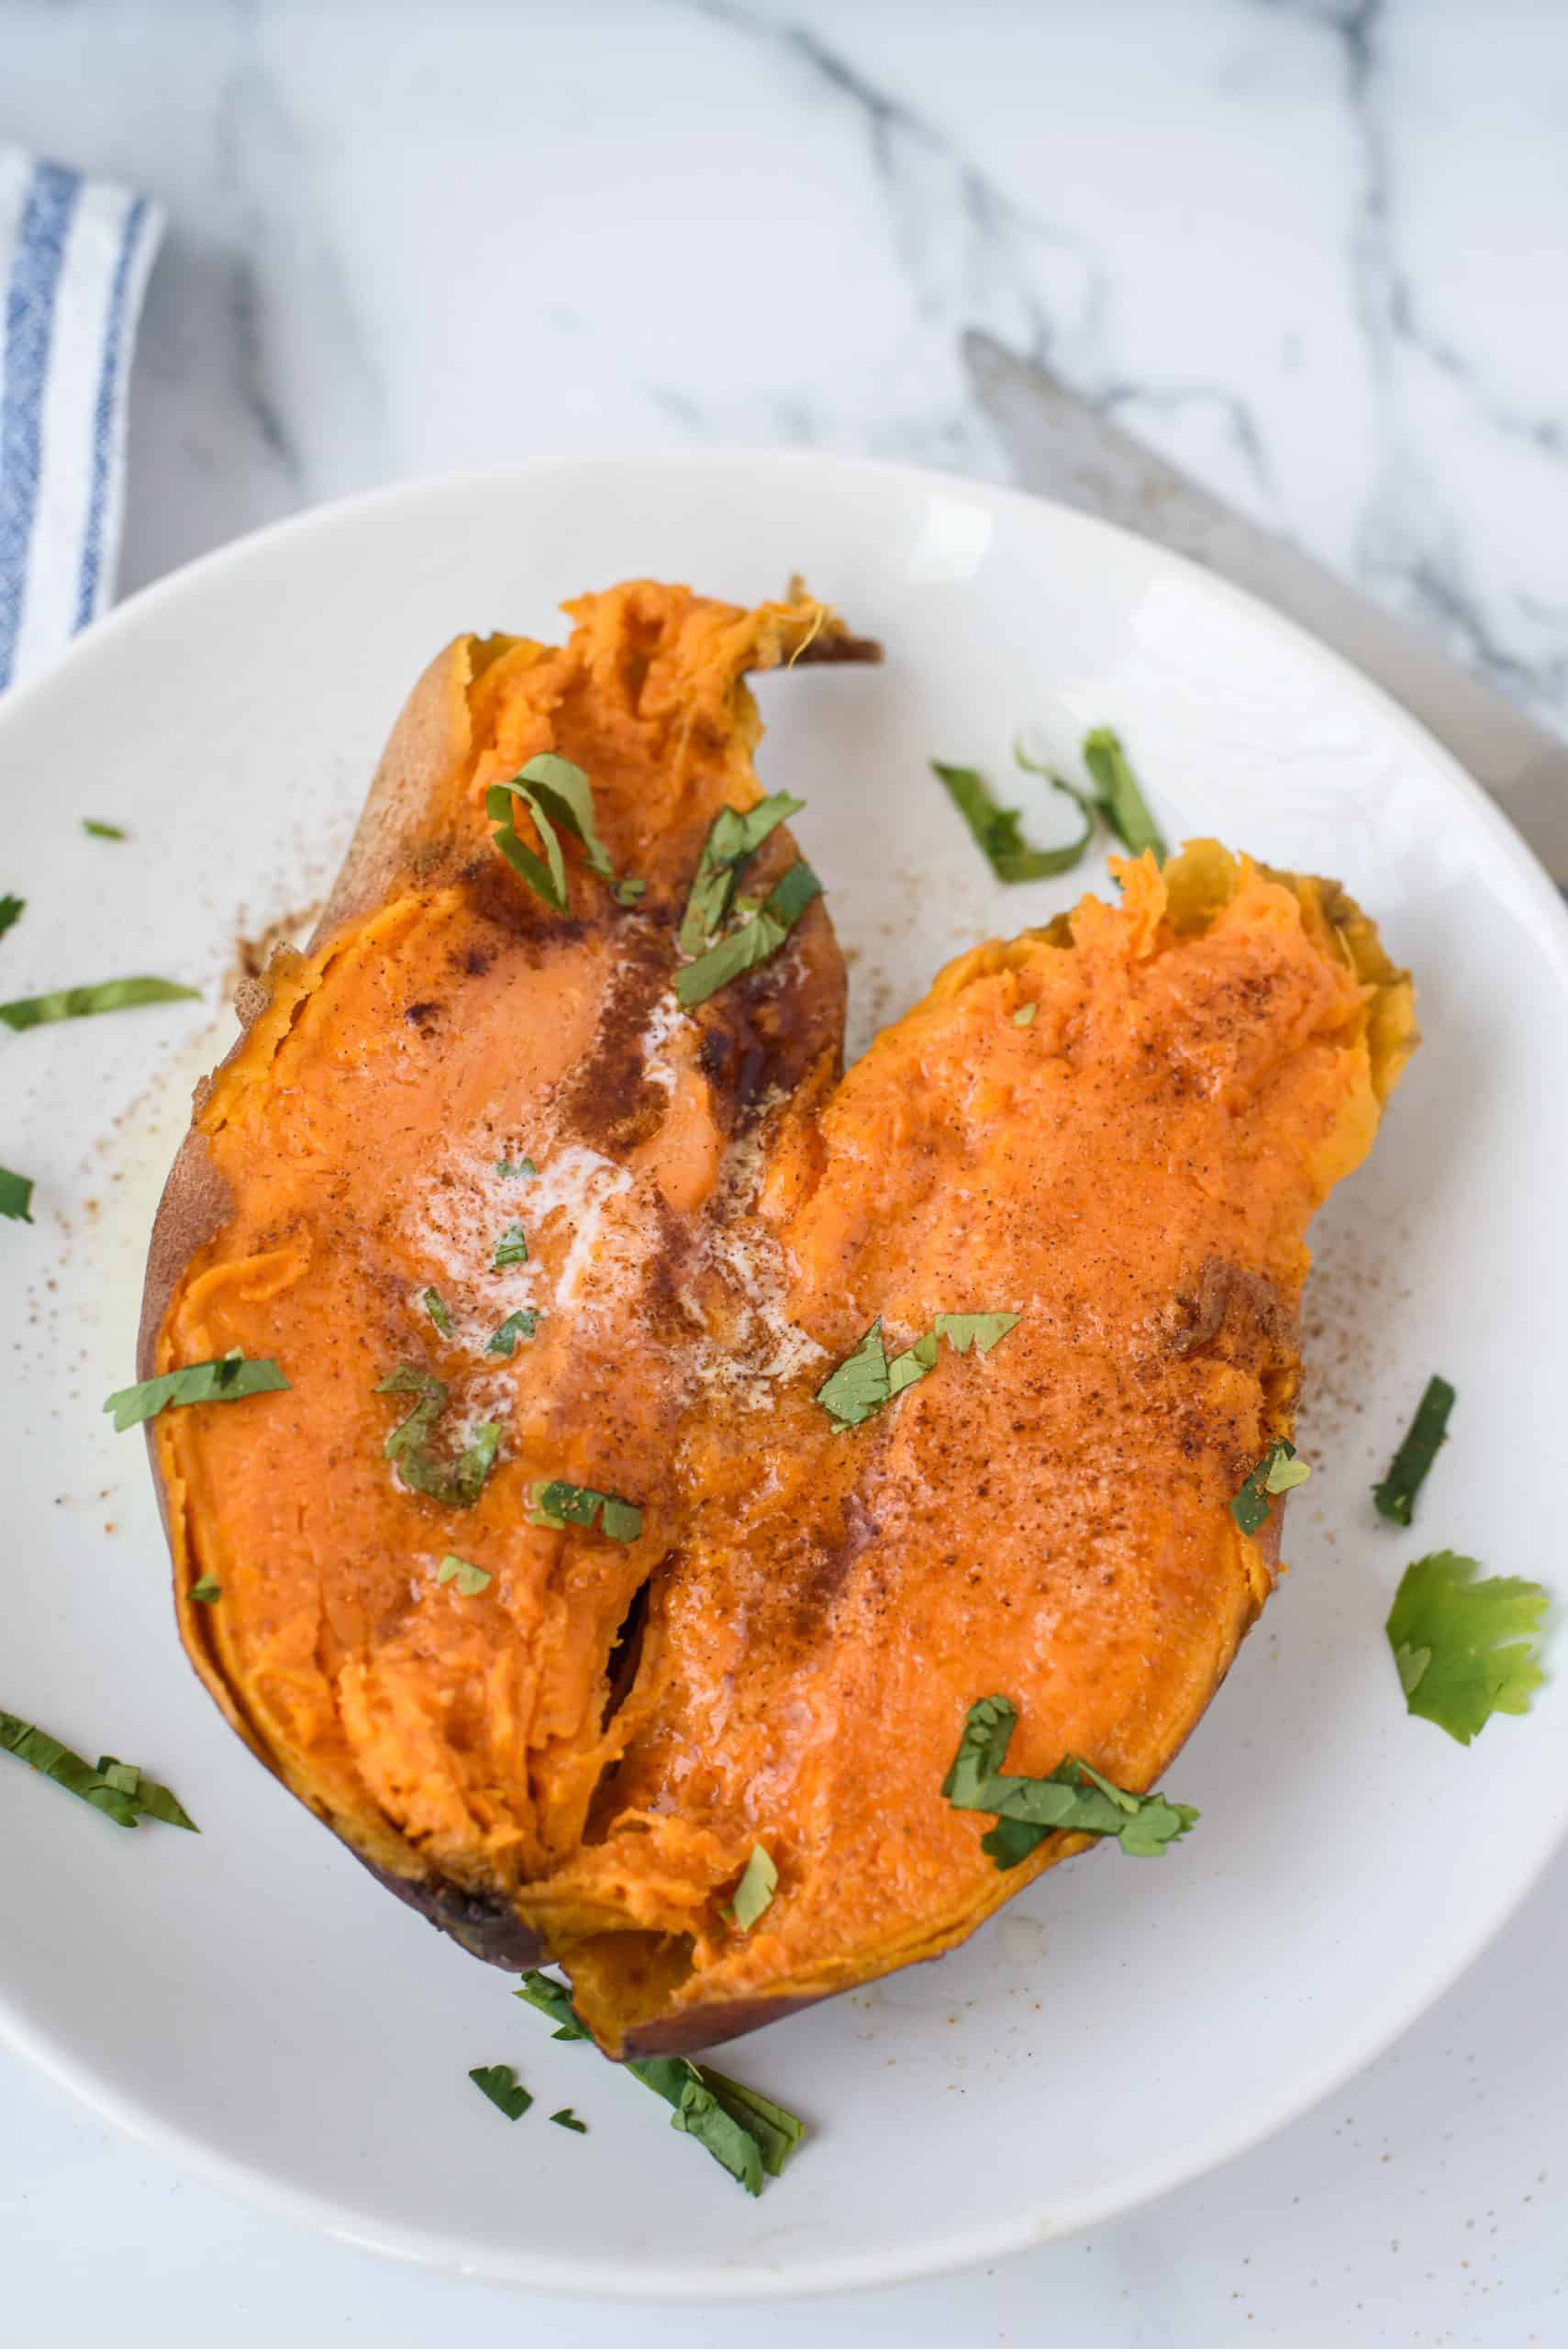 Learn how to make easy and delicious Sweet Potatoes in the Instant Pot. Creamy and perfect, and better than oven baked sweet potatoes!